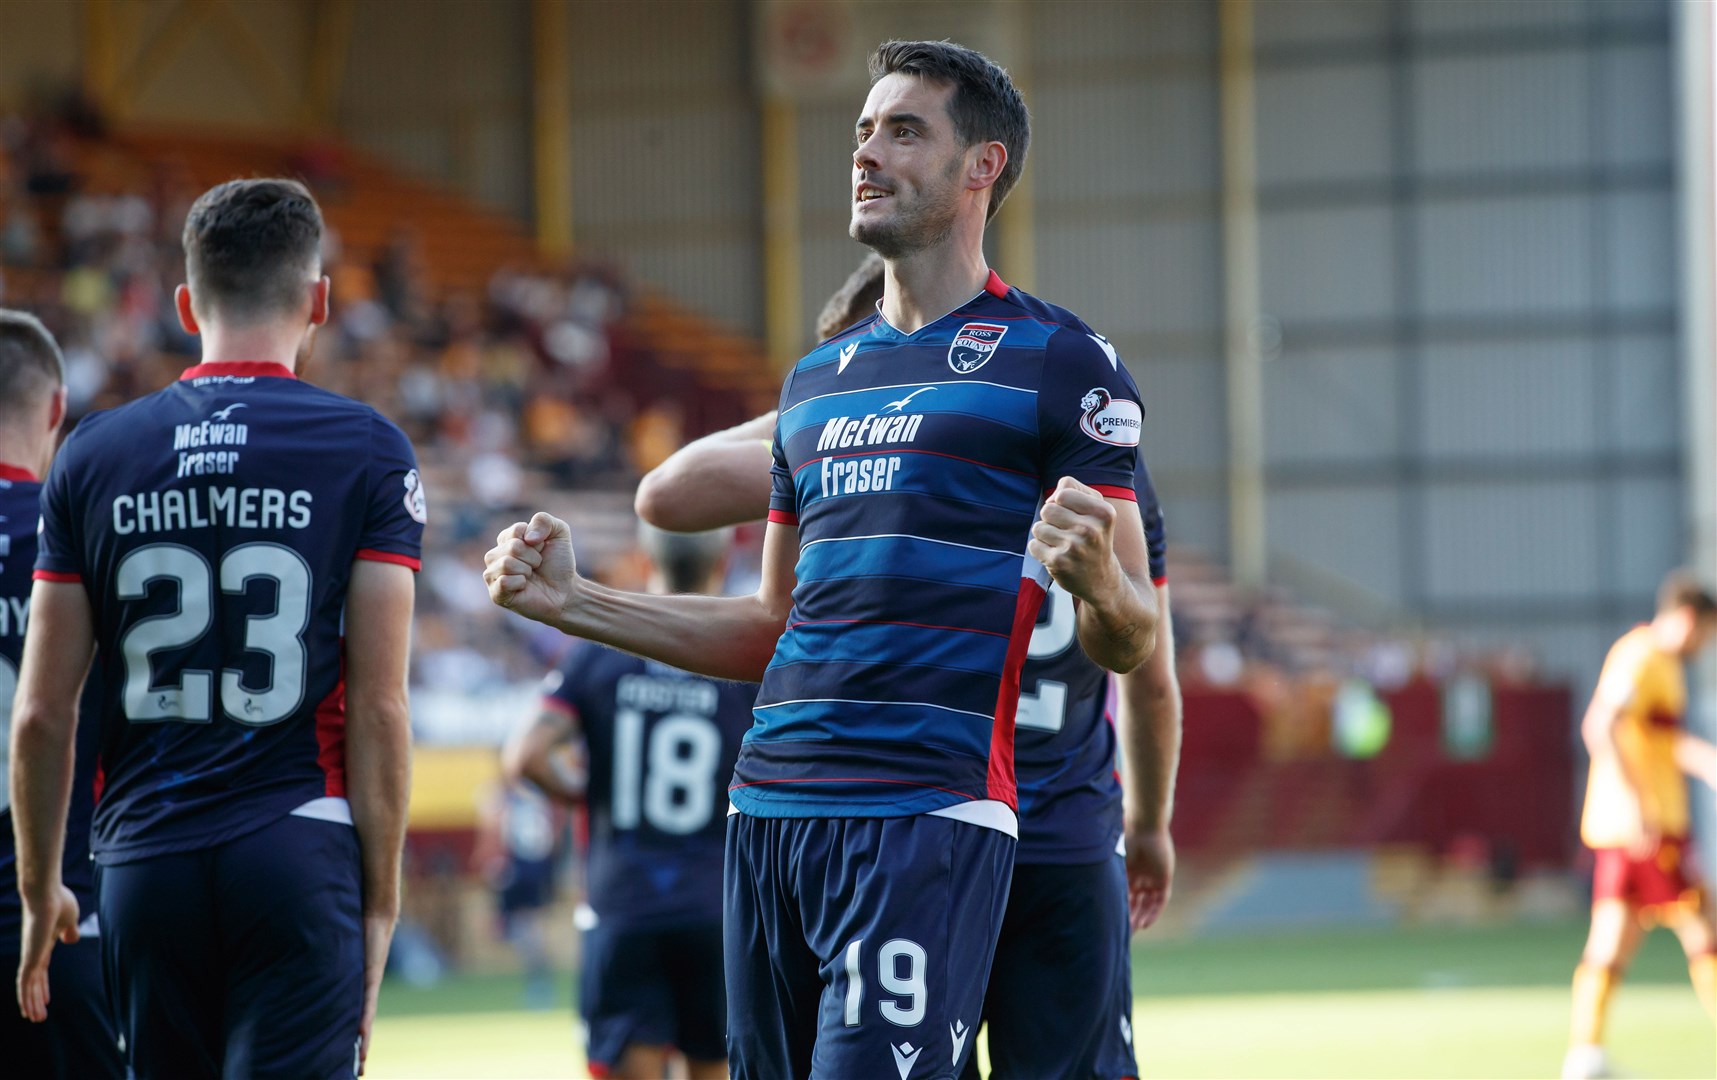 Brian Graham got Ross County up and running last week as a late goal saw them win for the second week in a row. Picture: Willie Vass